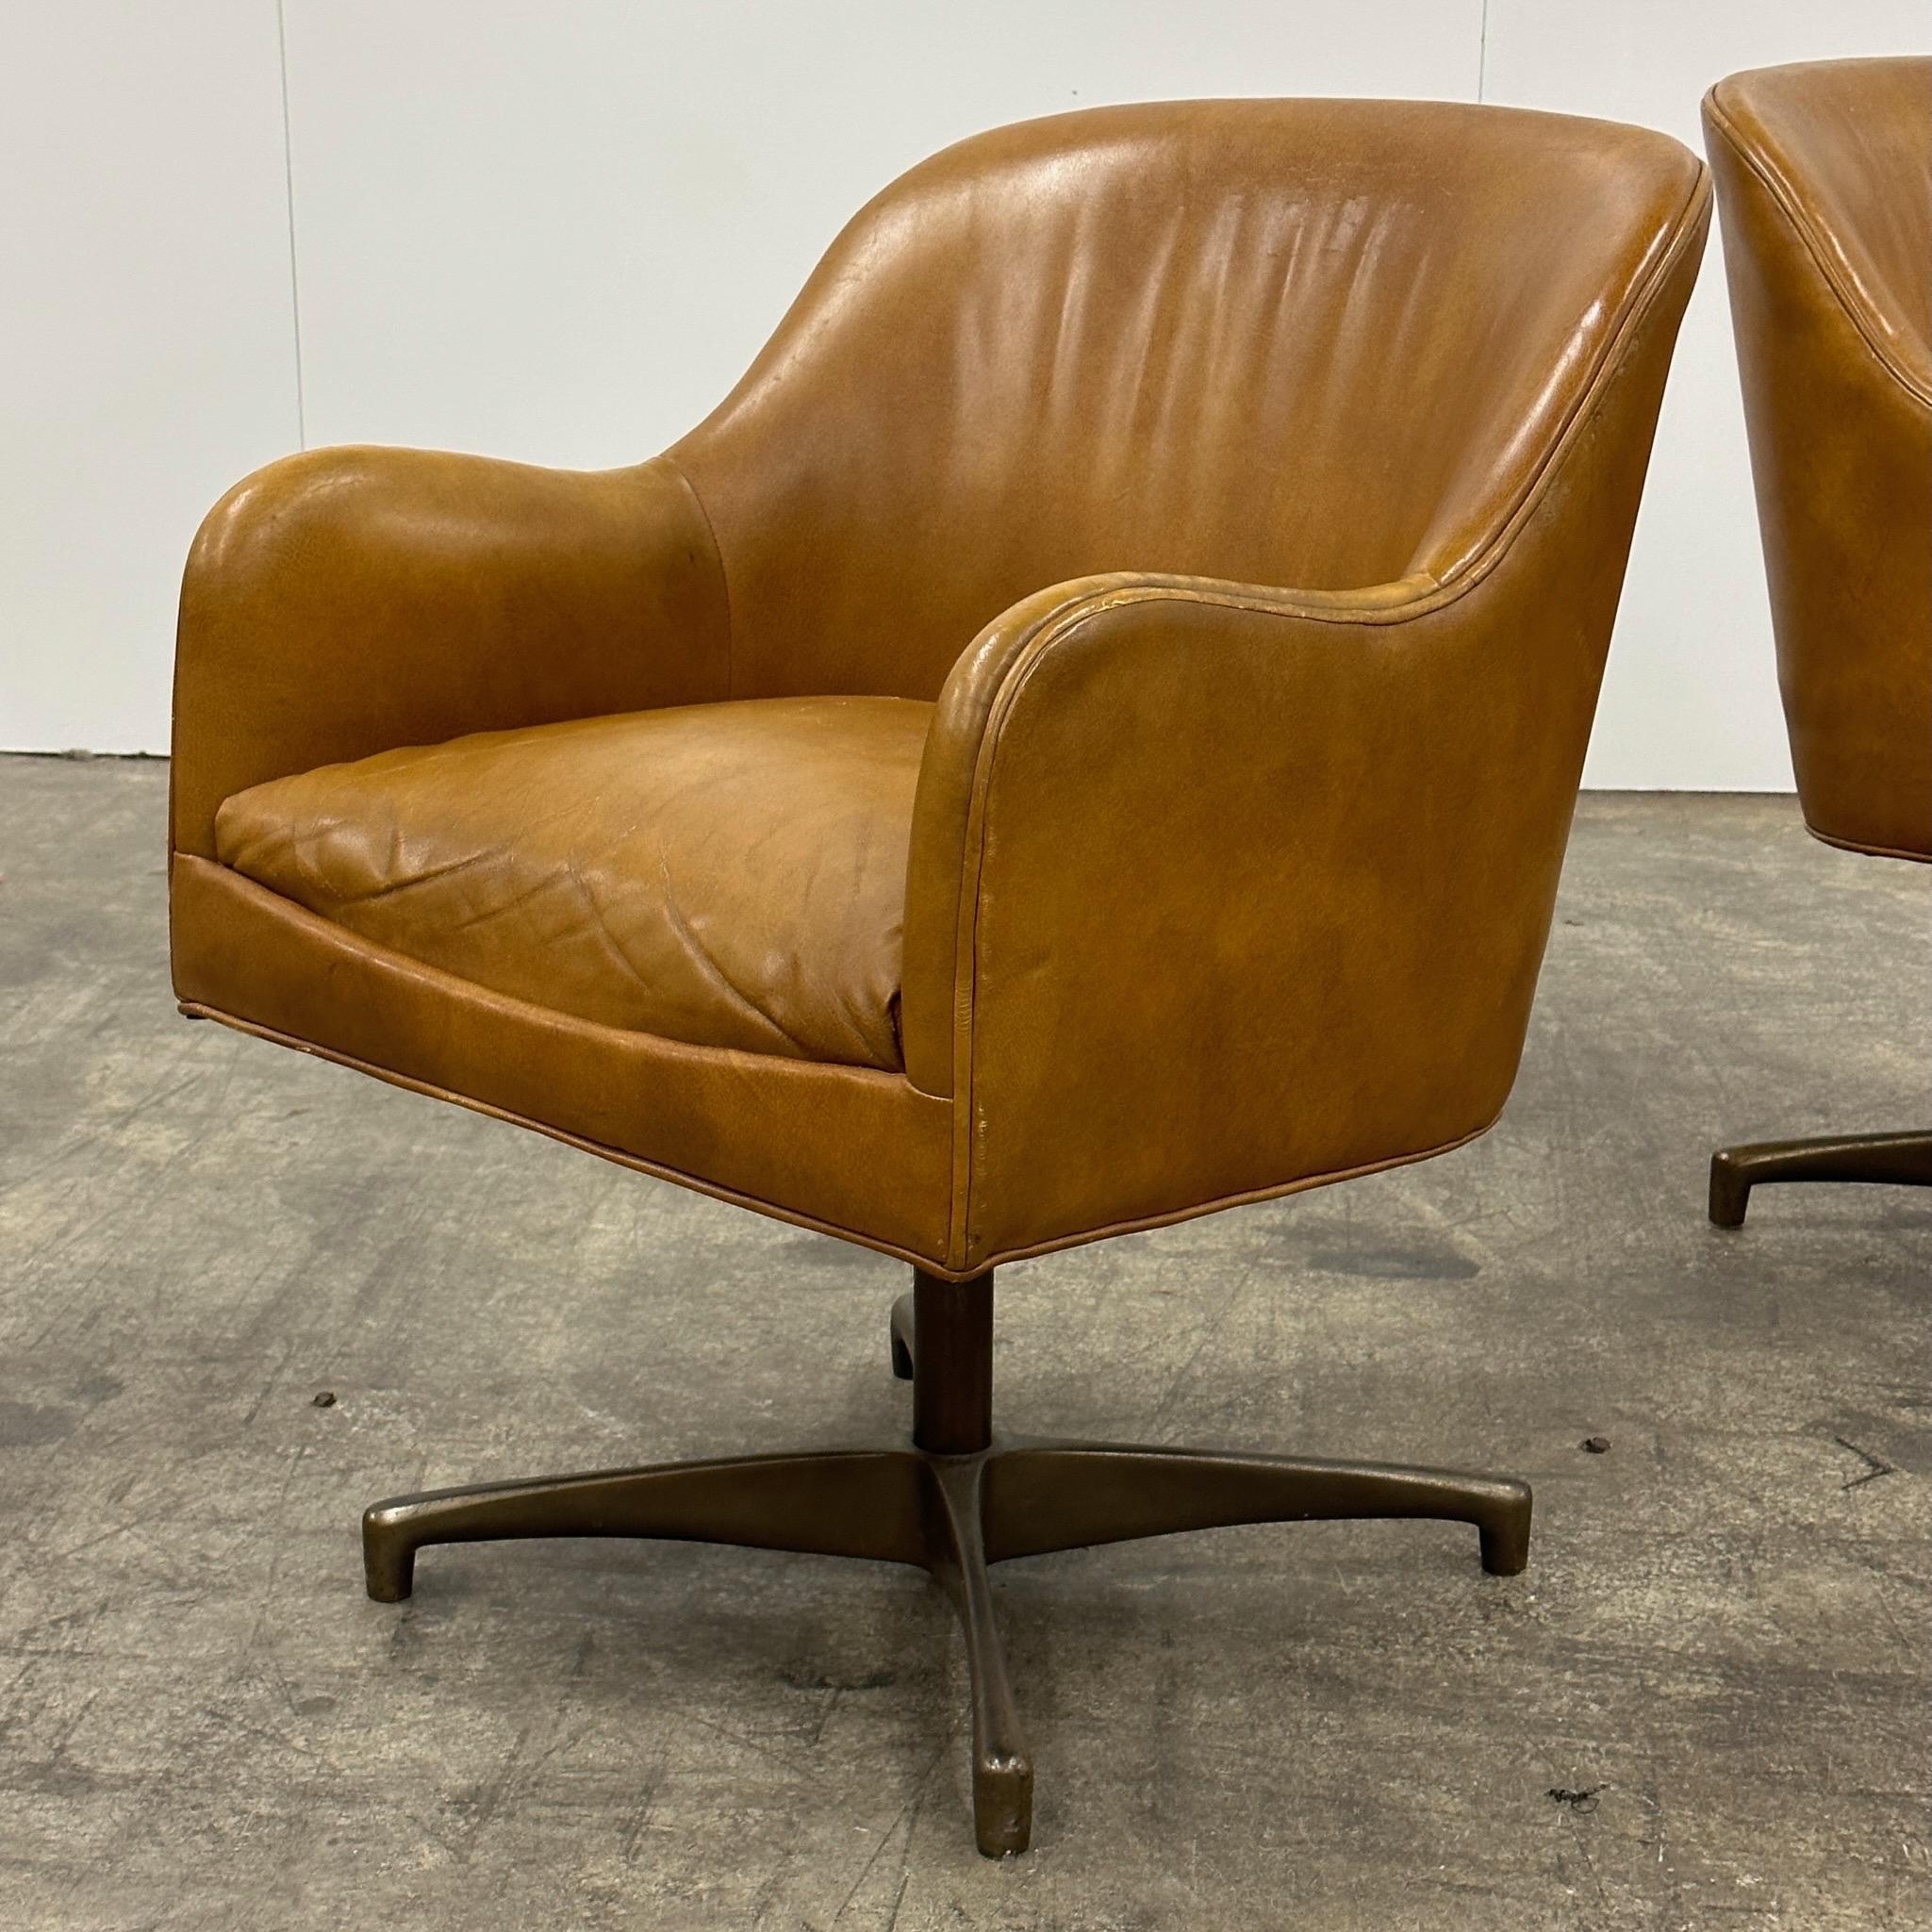 c. 1960s. Original leather upholstery with metal patinated base. Tagged. Made in Ohio.

Price is for the set. Contact us if you’d like to purchase a single item.